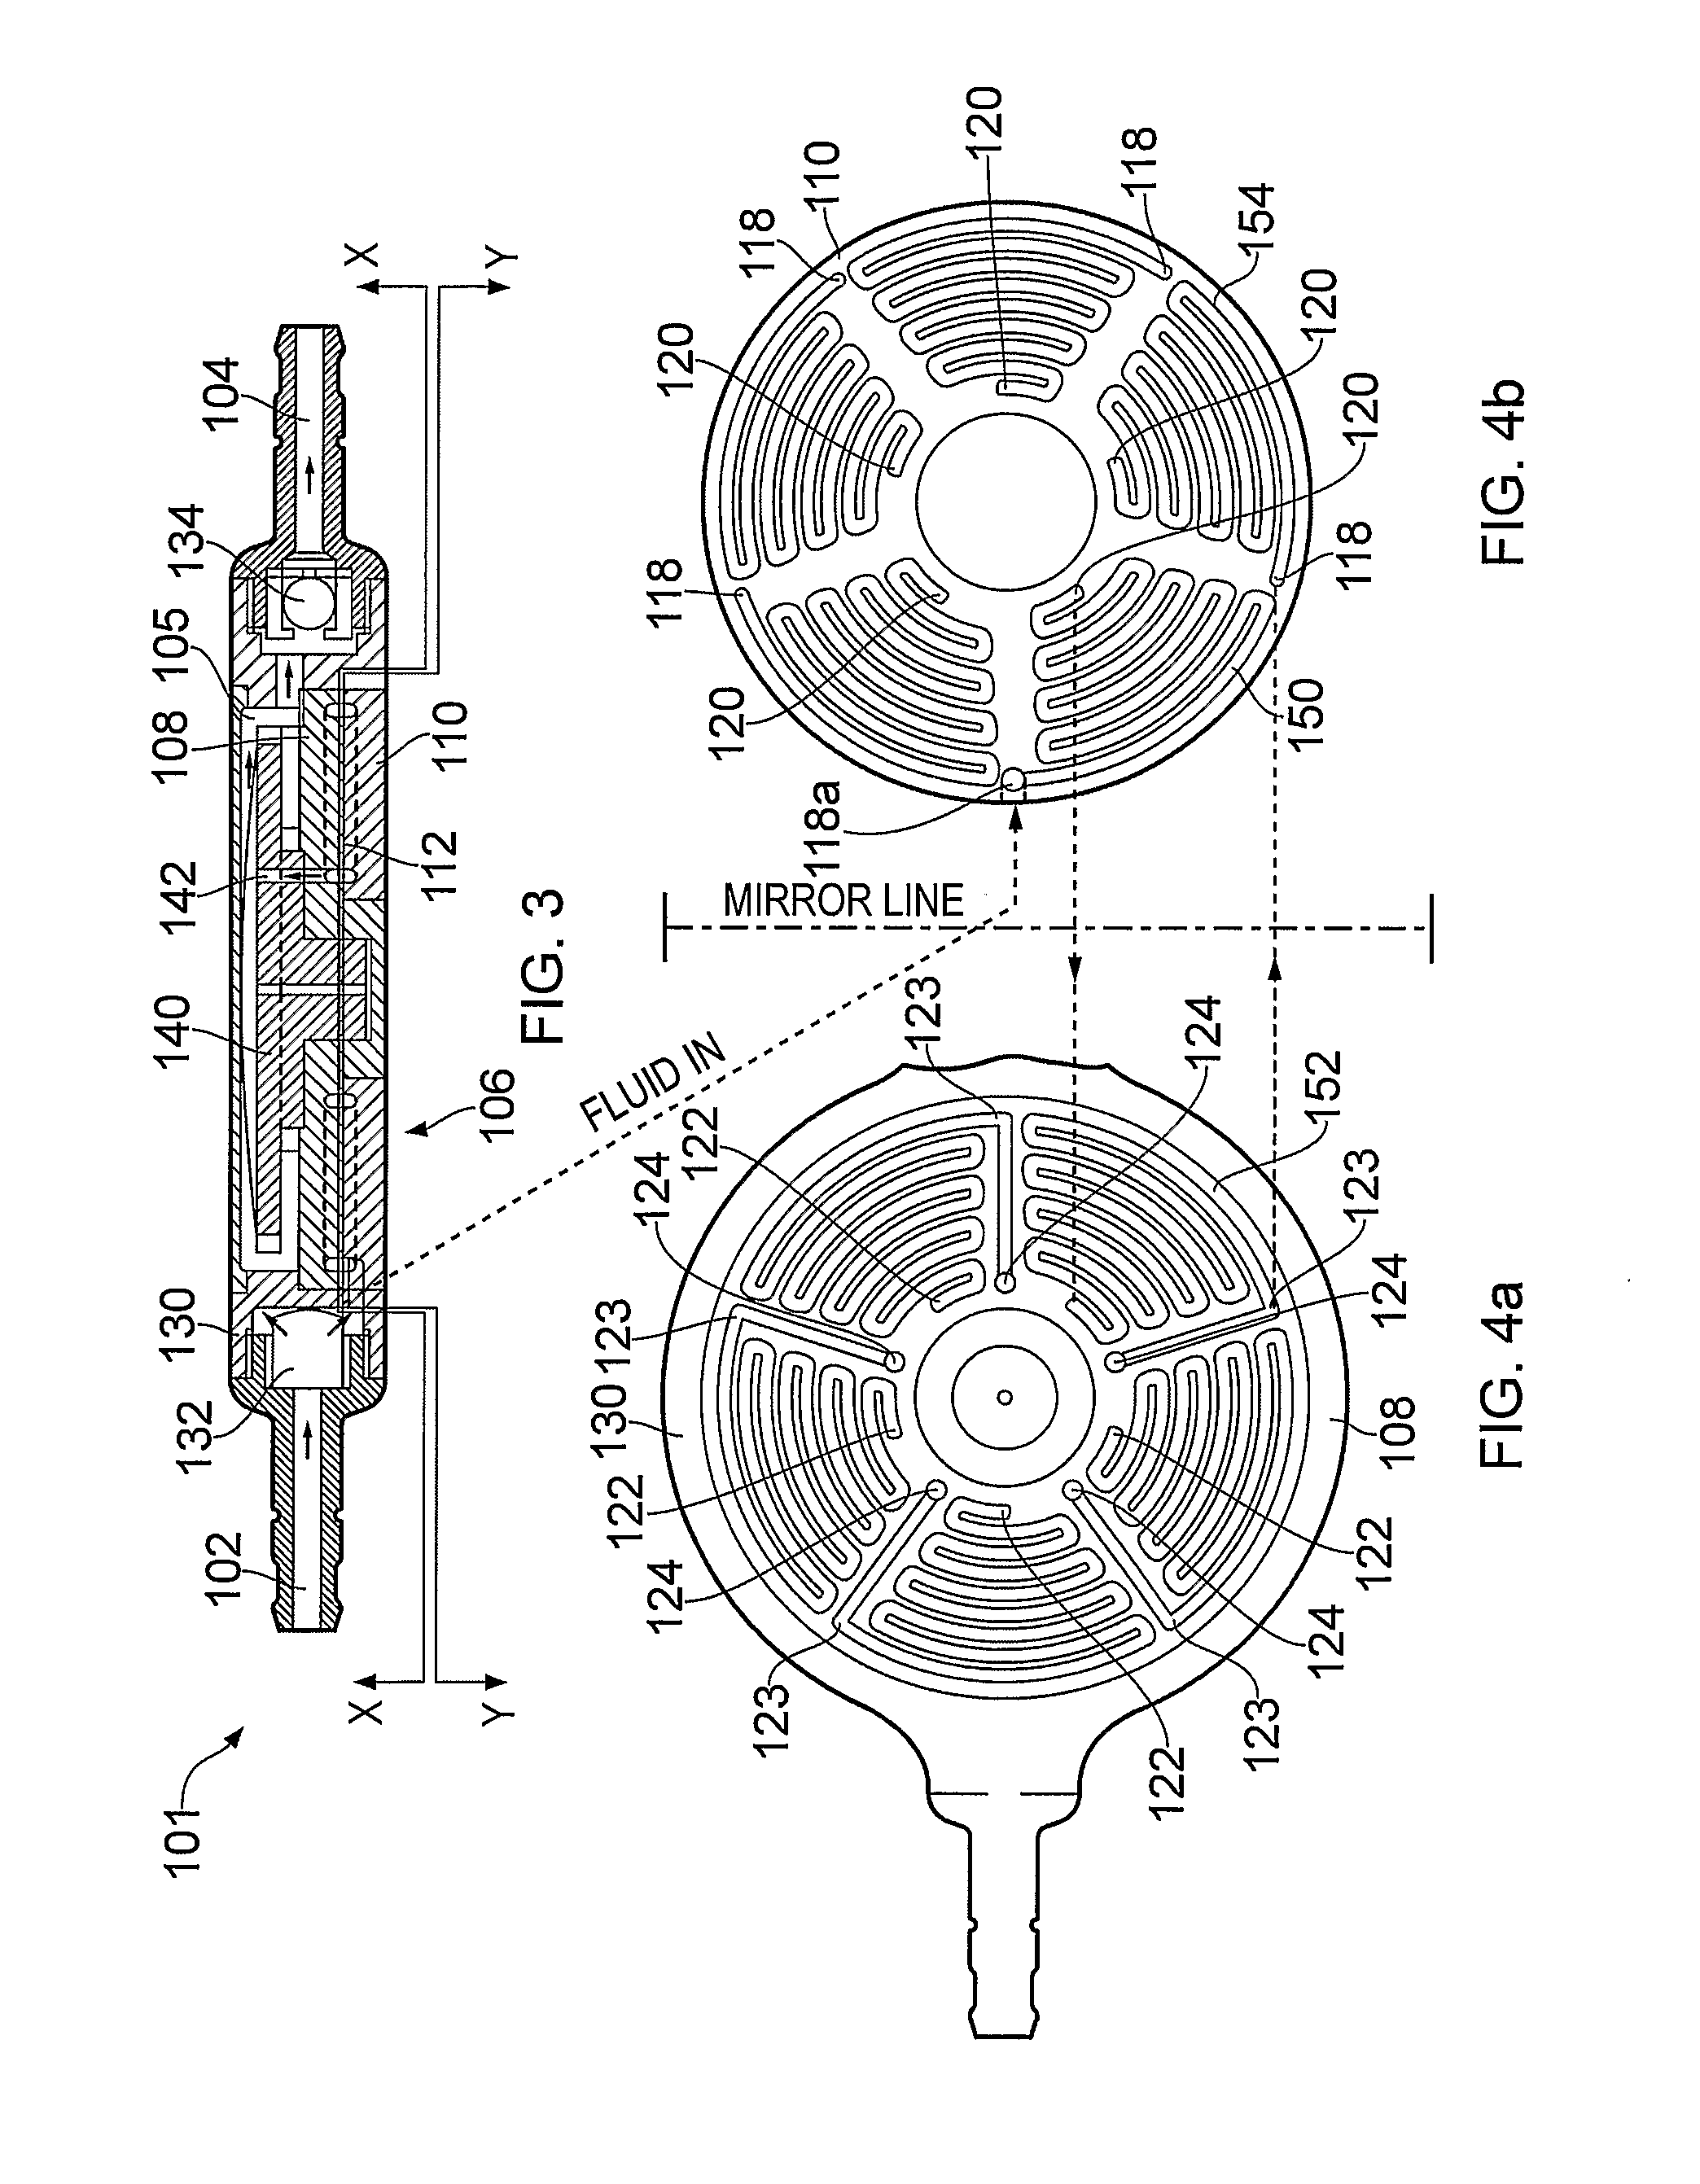 Device for Controlling the Rate of Flow of a Fluid